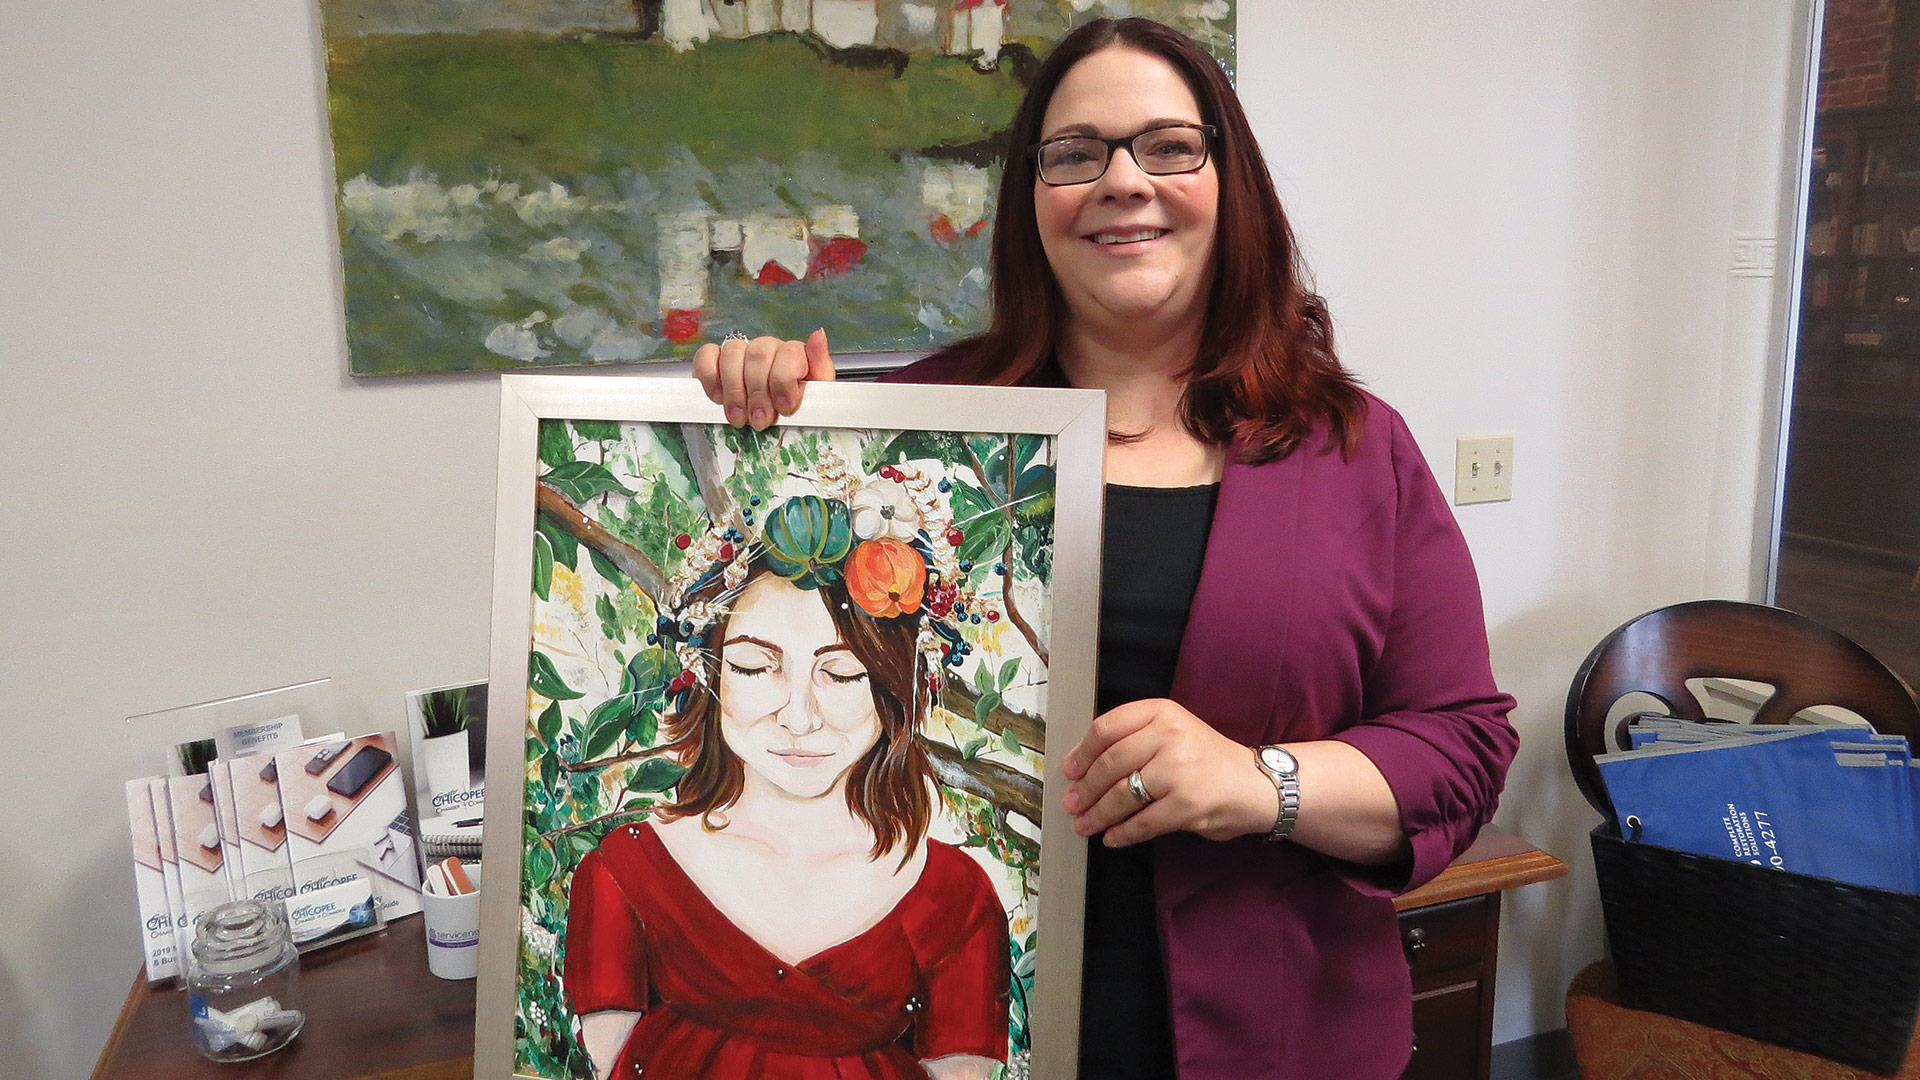 Jessica Roncariti-Howe, here displaying one of her own paintings